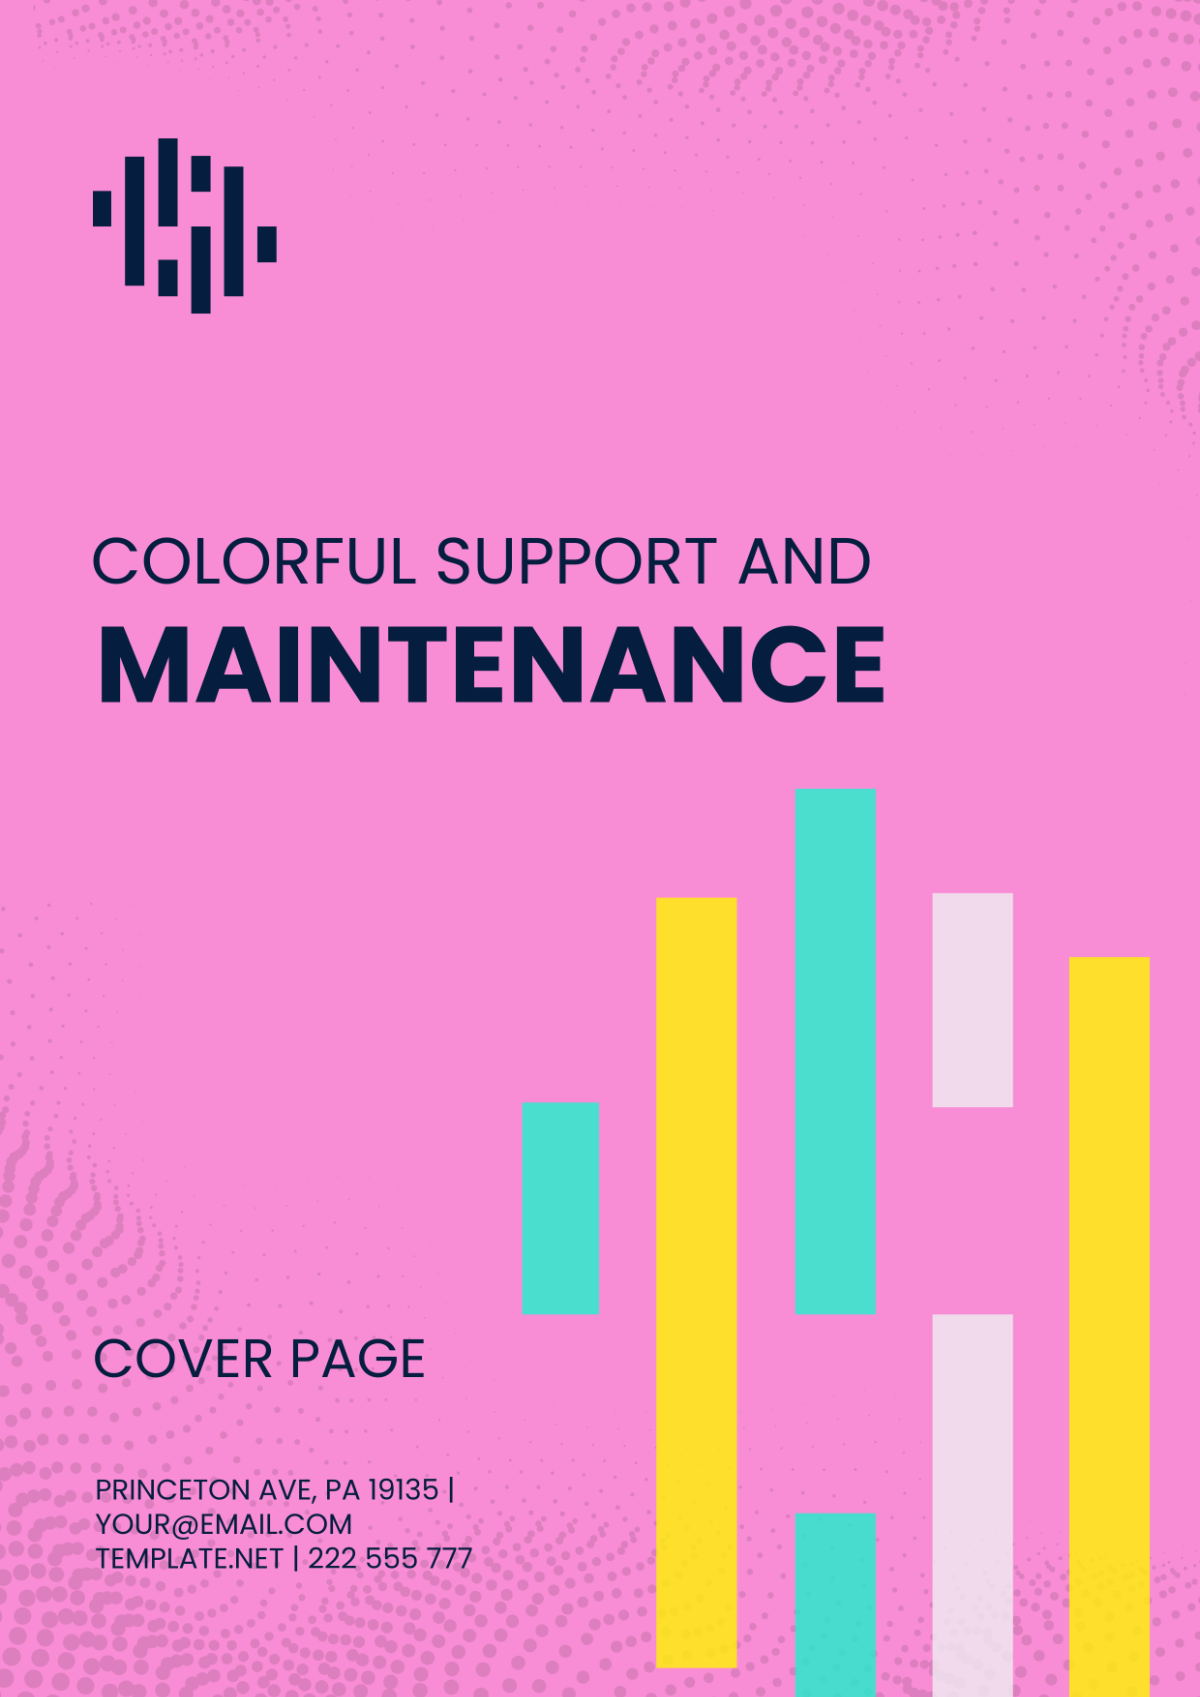 Colorful Support and Maintenance Cover Page